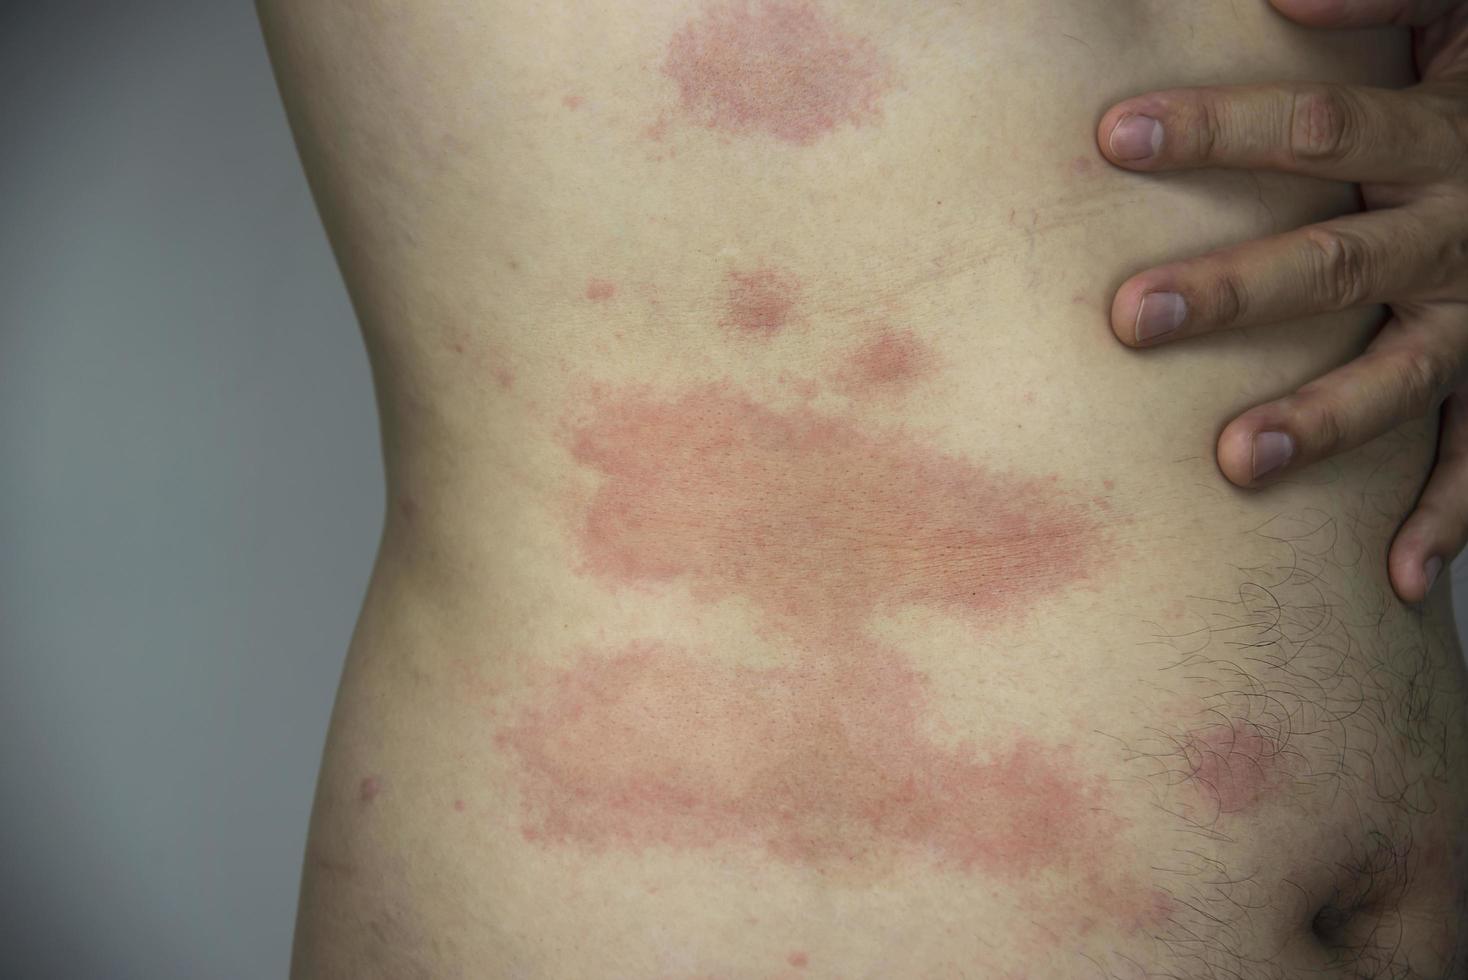 Man getting red skin rash at his body part - people with skin allergy problem concept photo